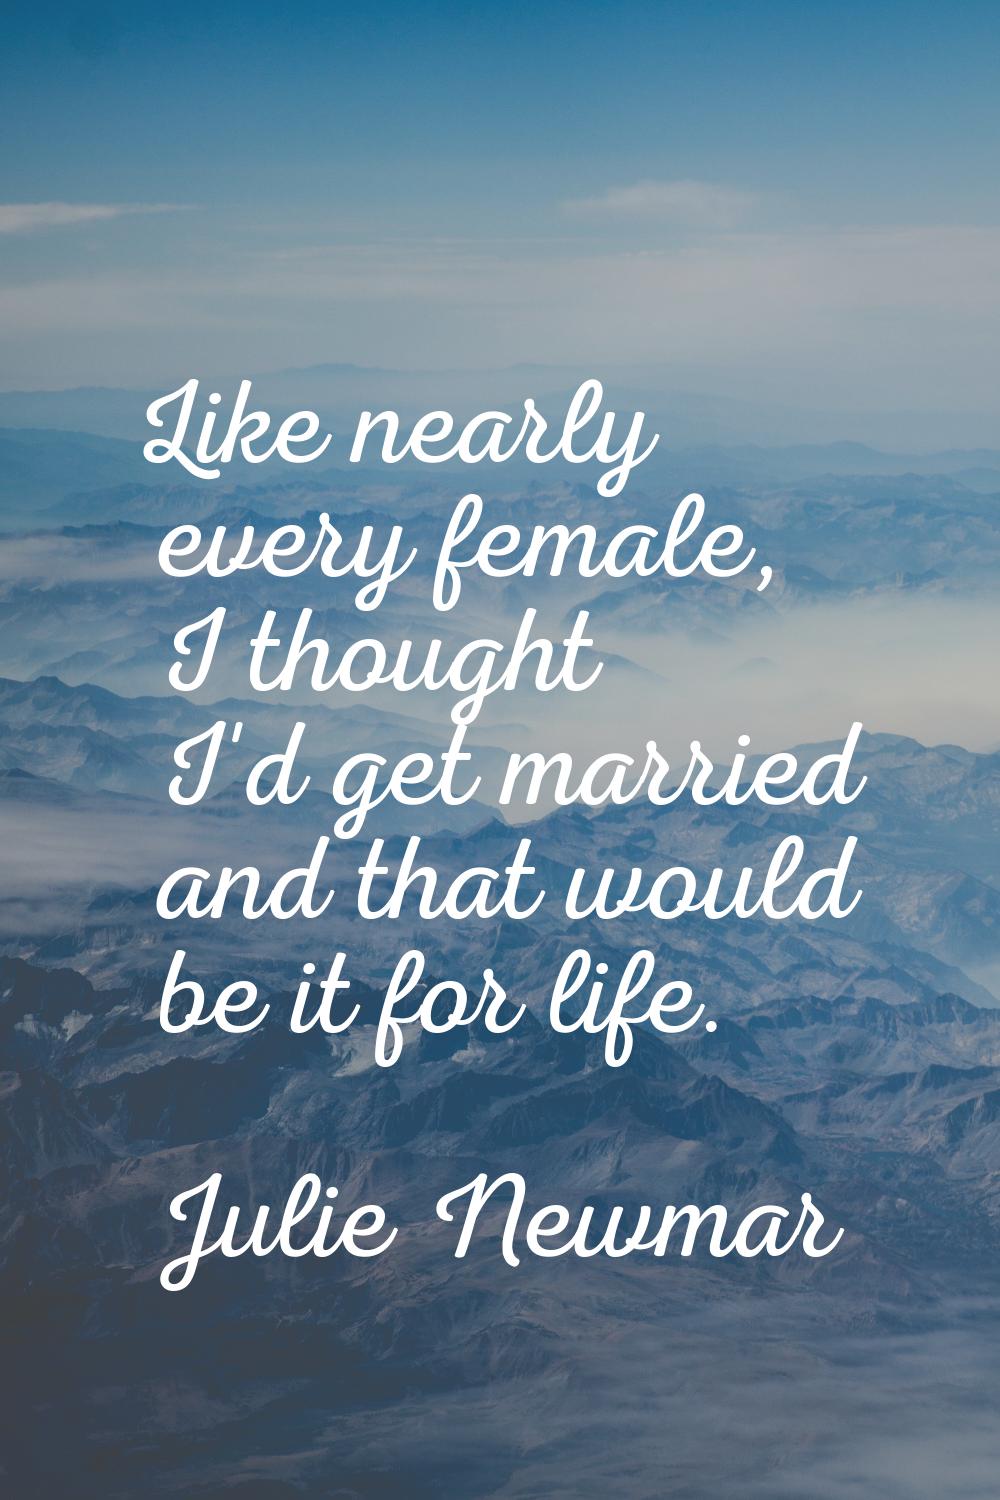 Like nearly every female, I thought I'd get married and that would be it for life.